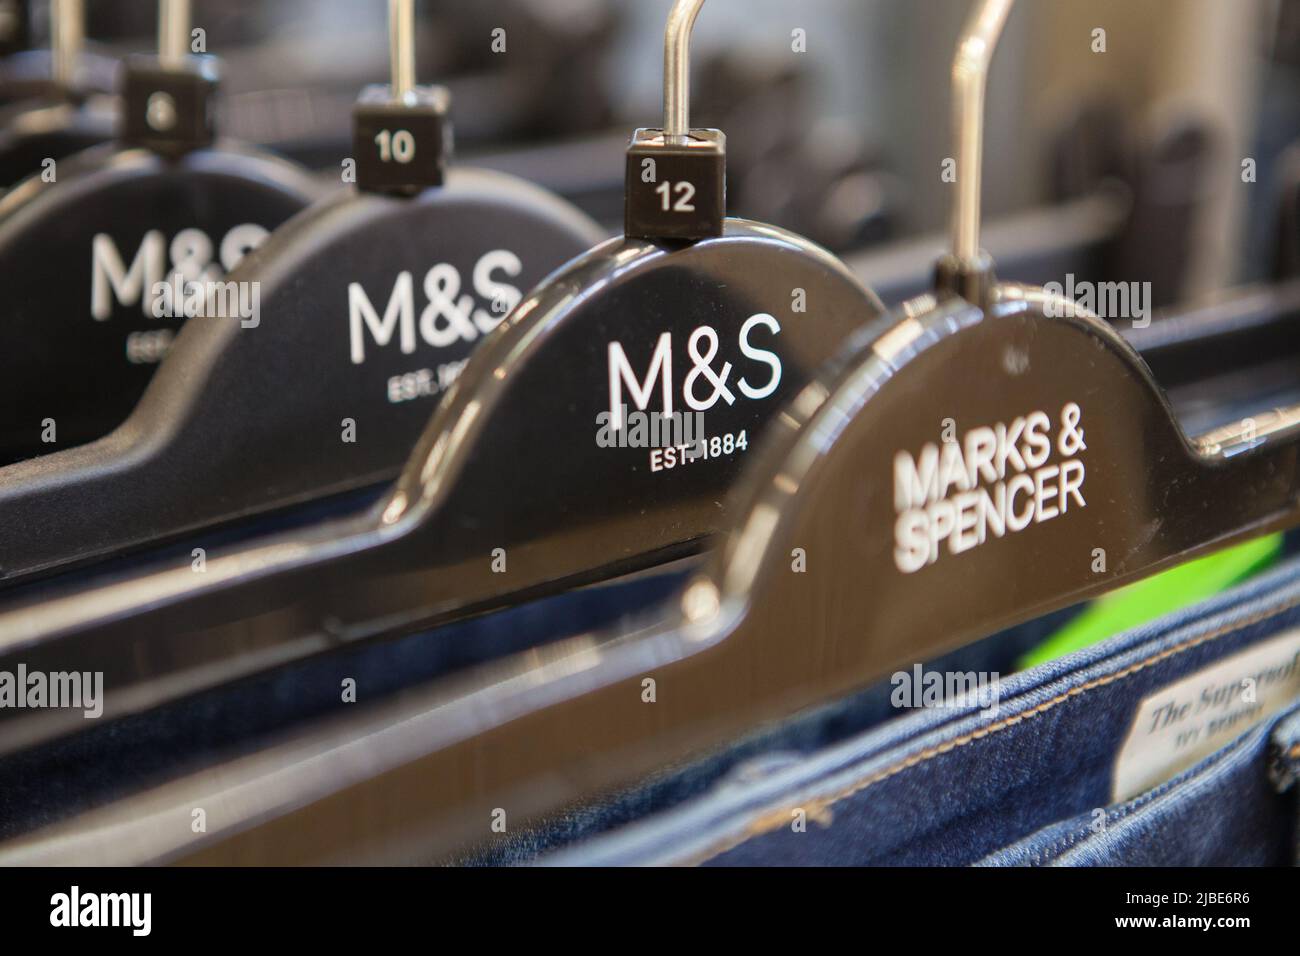 Clothing hangers in a Marks & Spencer store Stock Photo